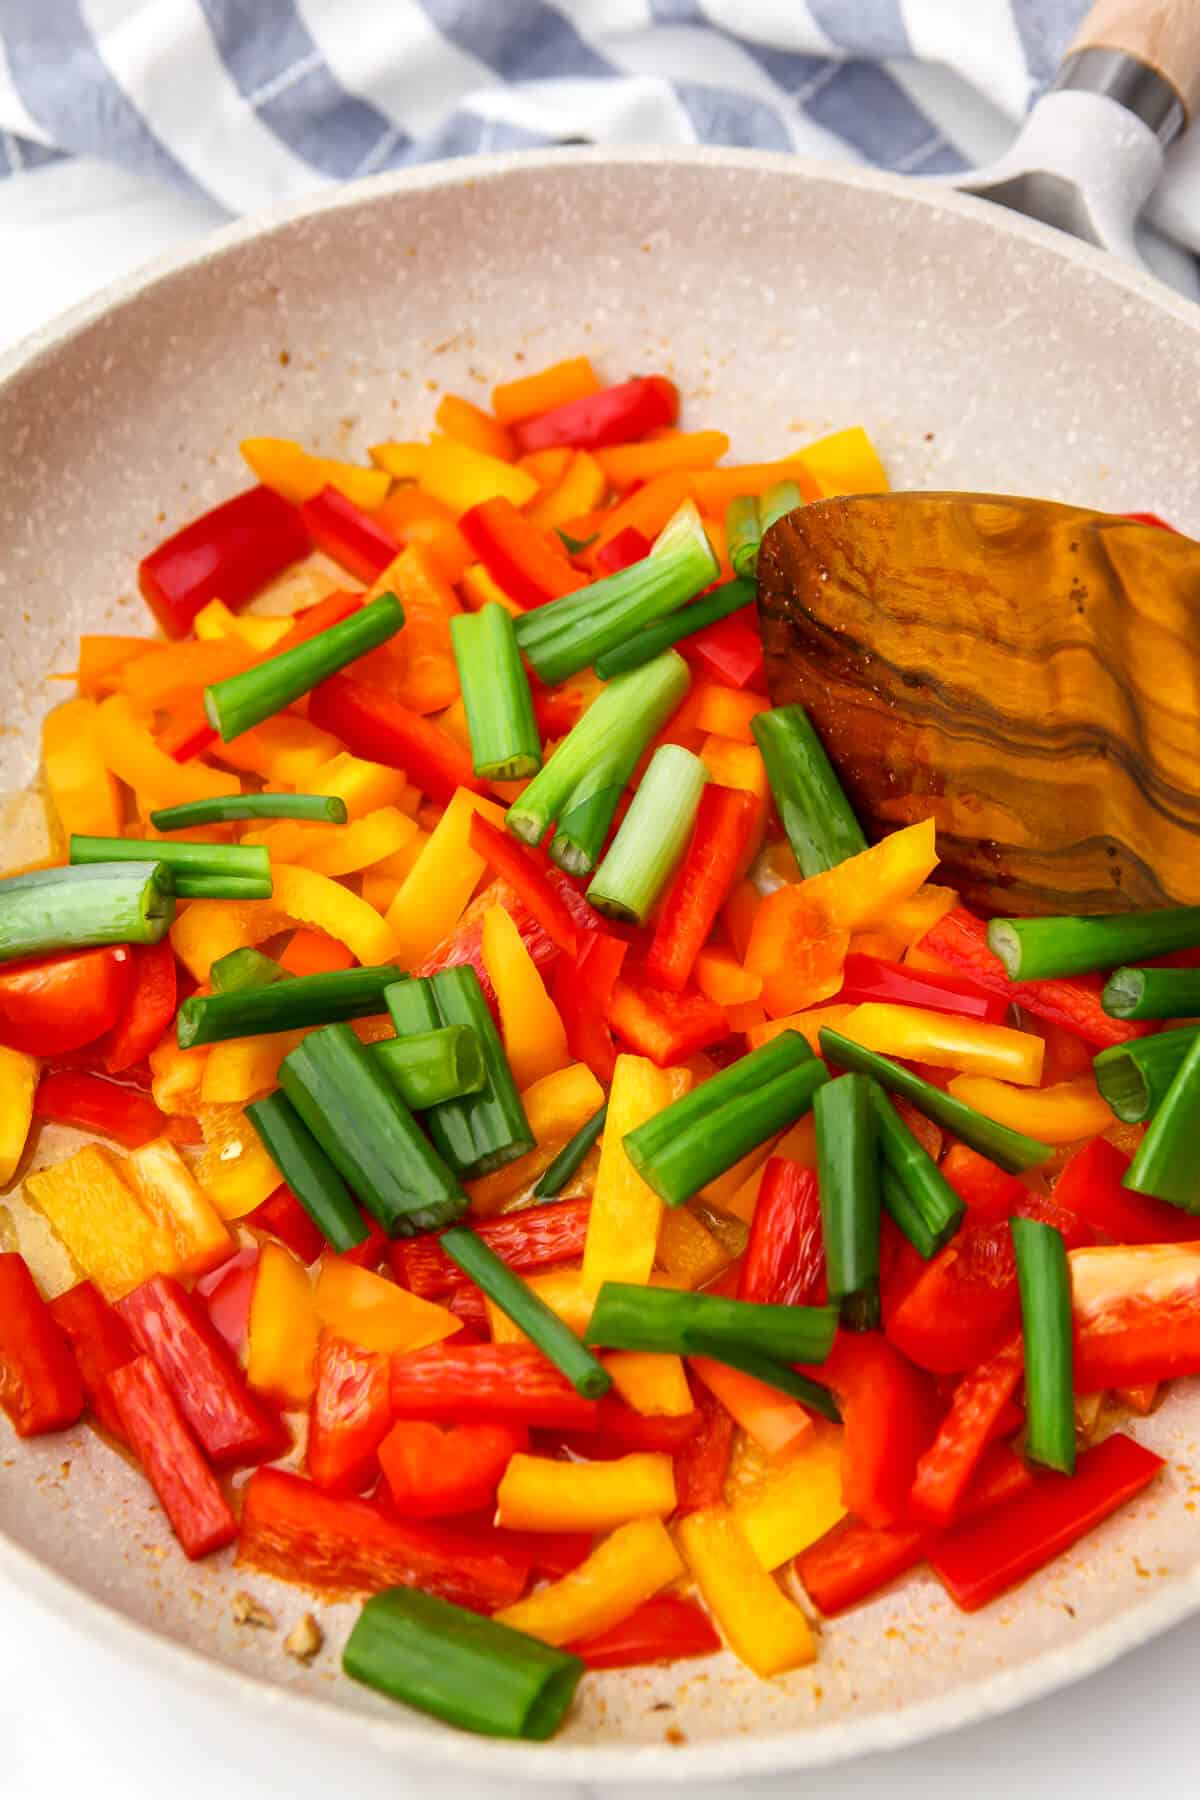 Red bell peppers, yellow bell peppers, and green onions sautéing in a pan.